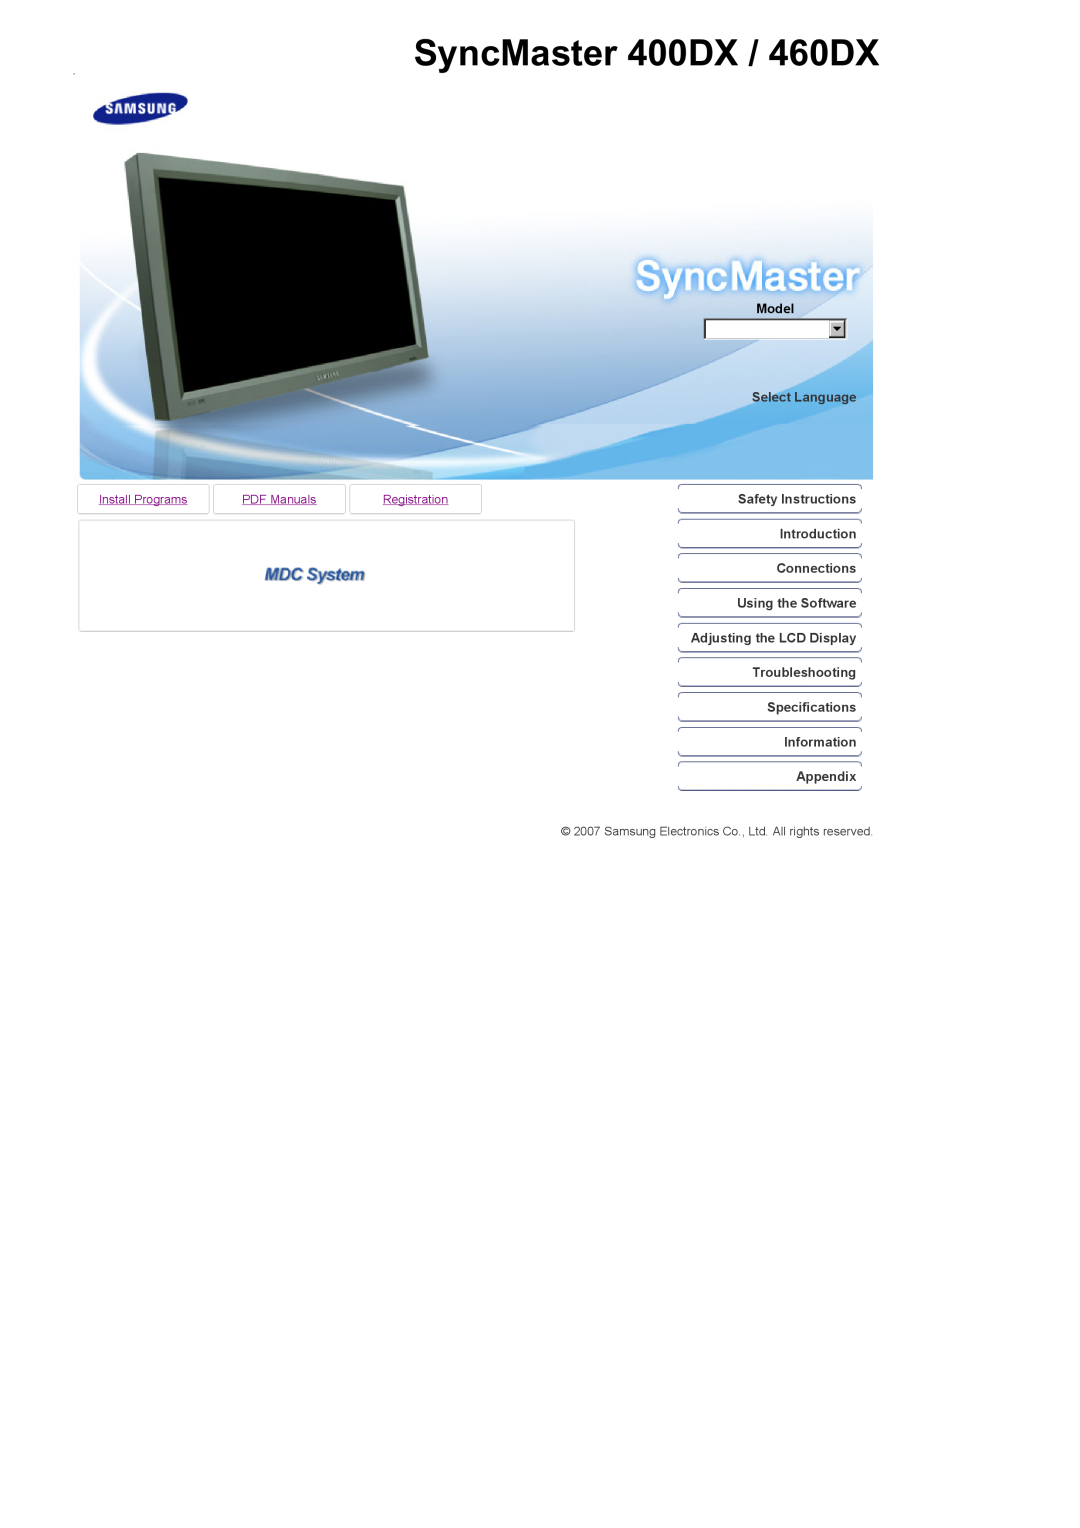 Samsung specifications SyncMaster 400DX / 460DX, Model 